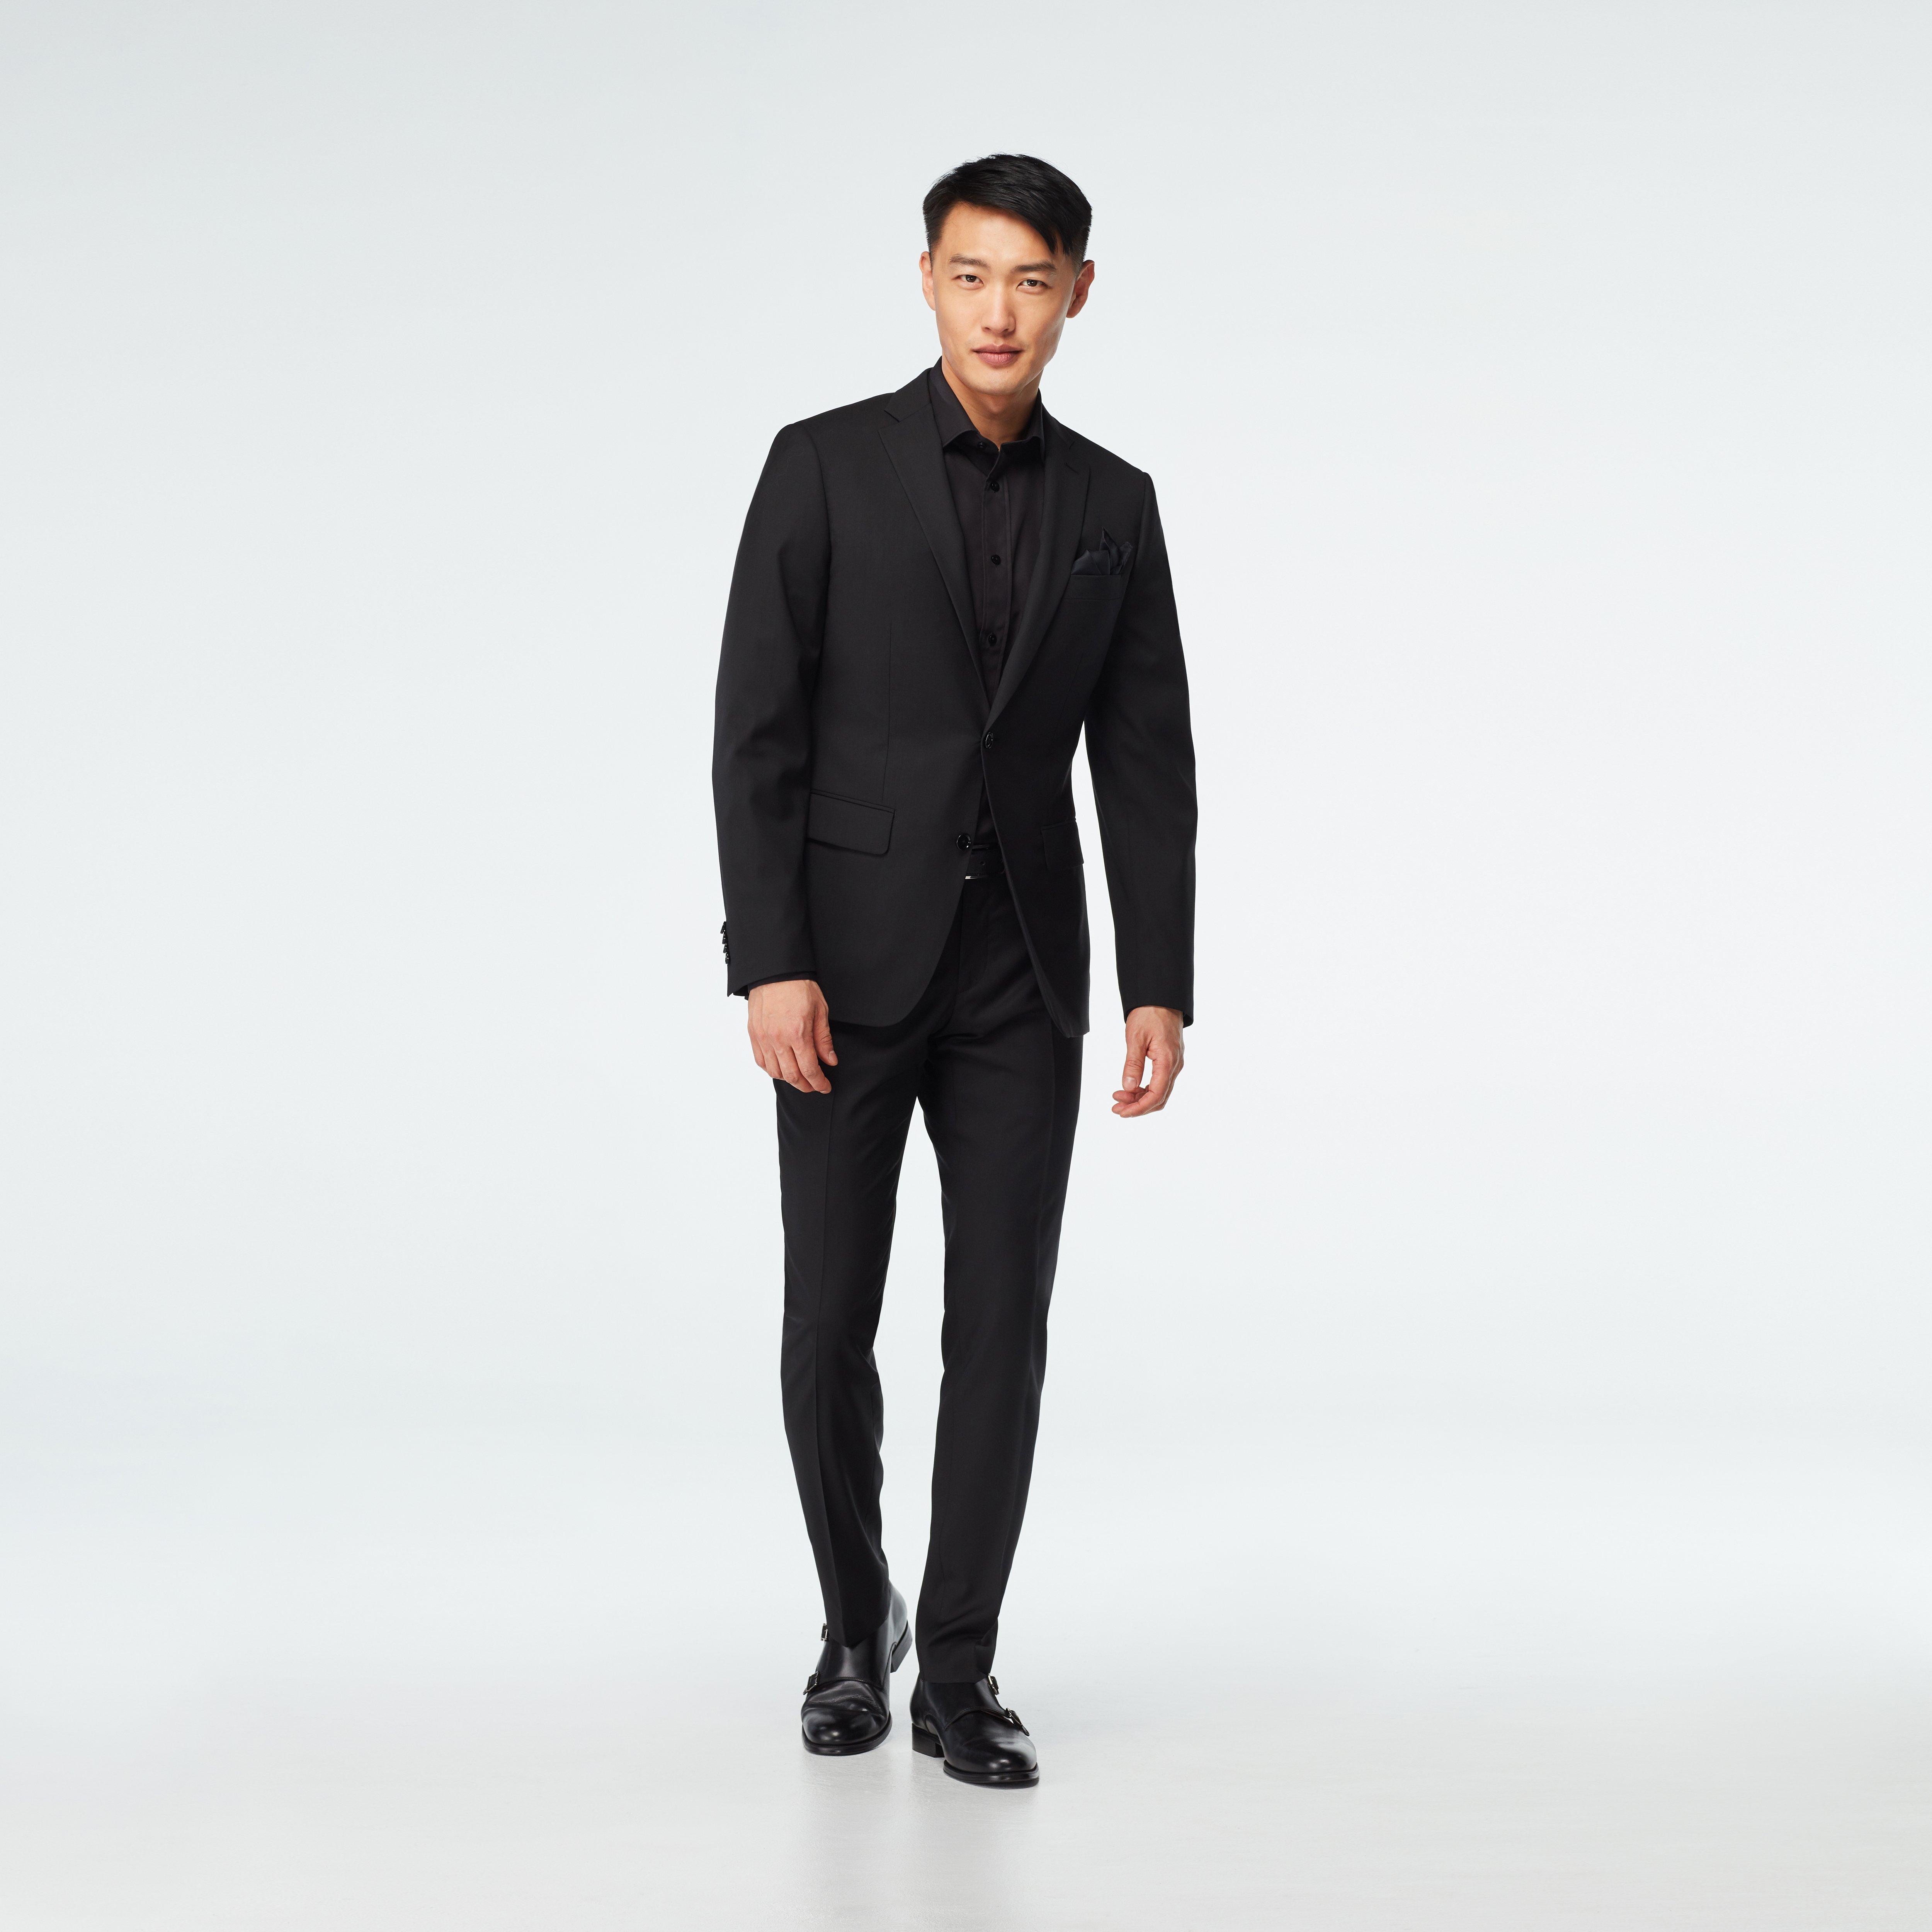 Wholesale shiny black suit men To Add Class To Every Man's Wardrobe 